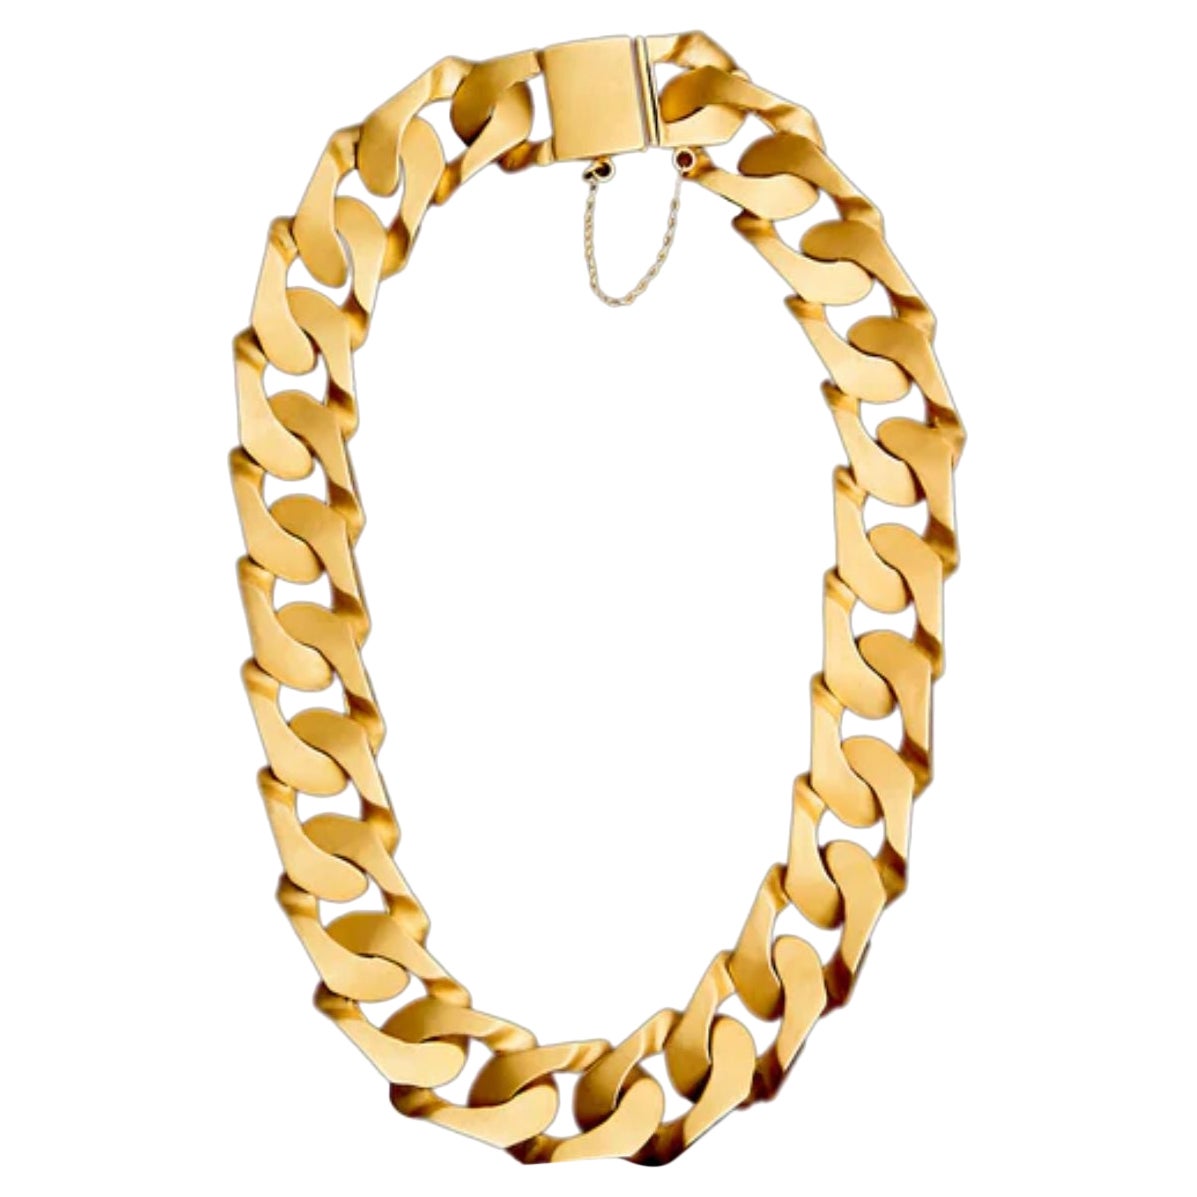 Kuban Chain Necklace in 24K Gold with Satin Finish  For Sale